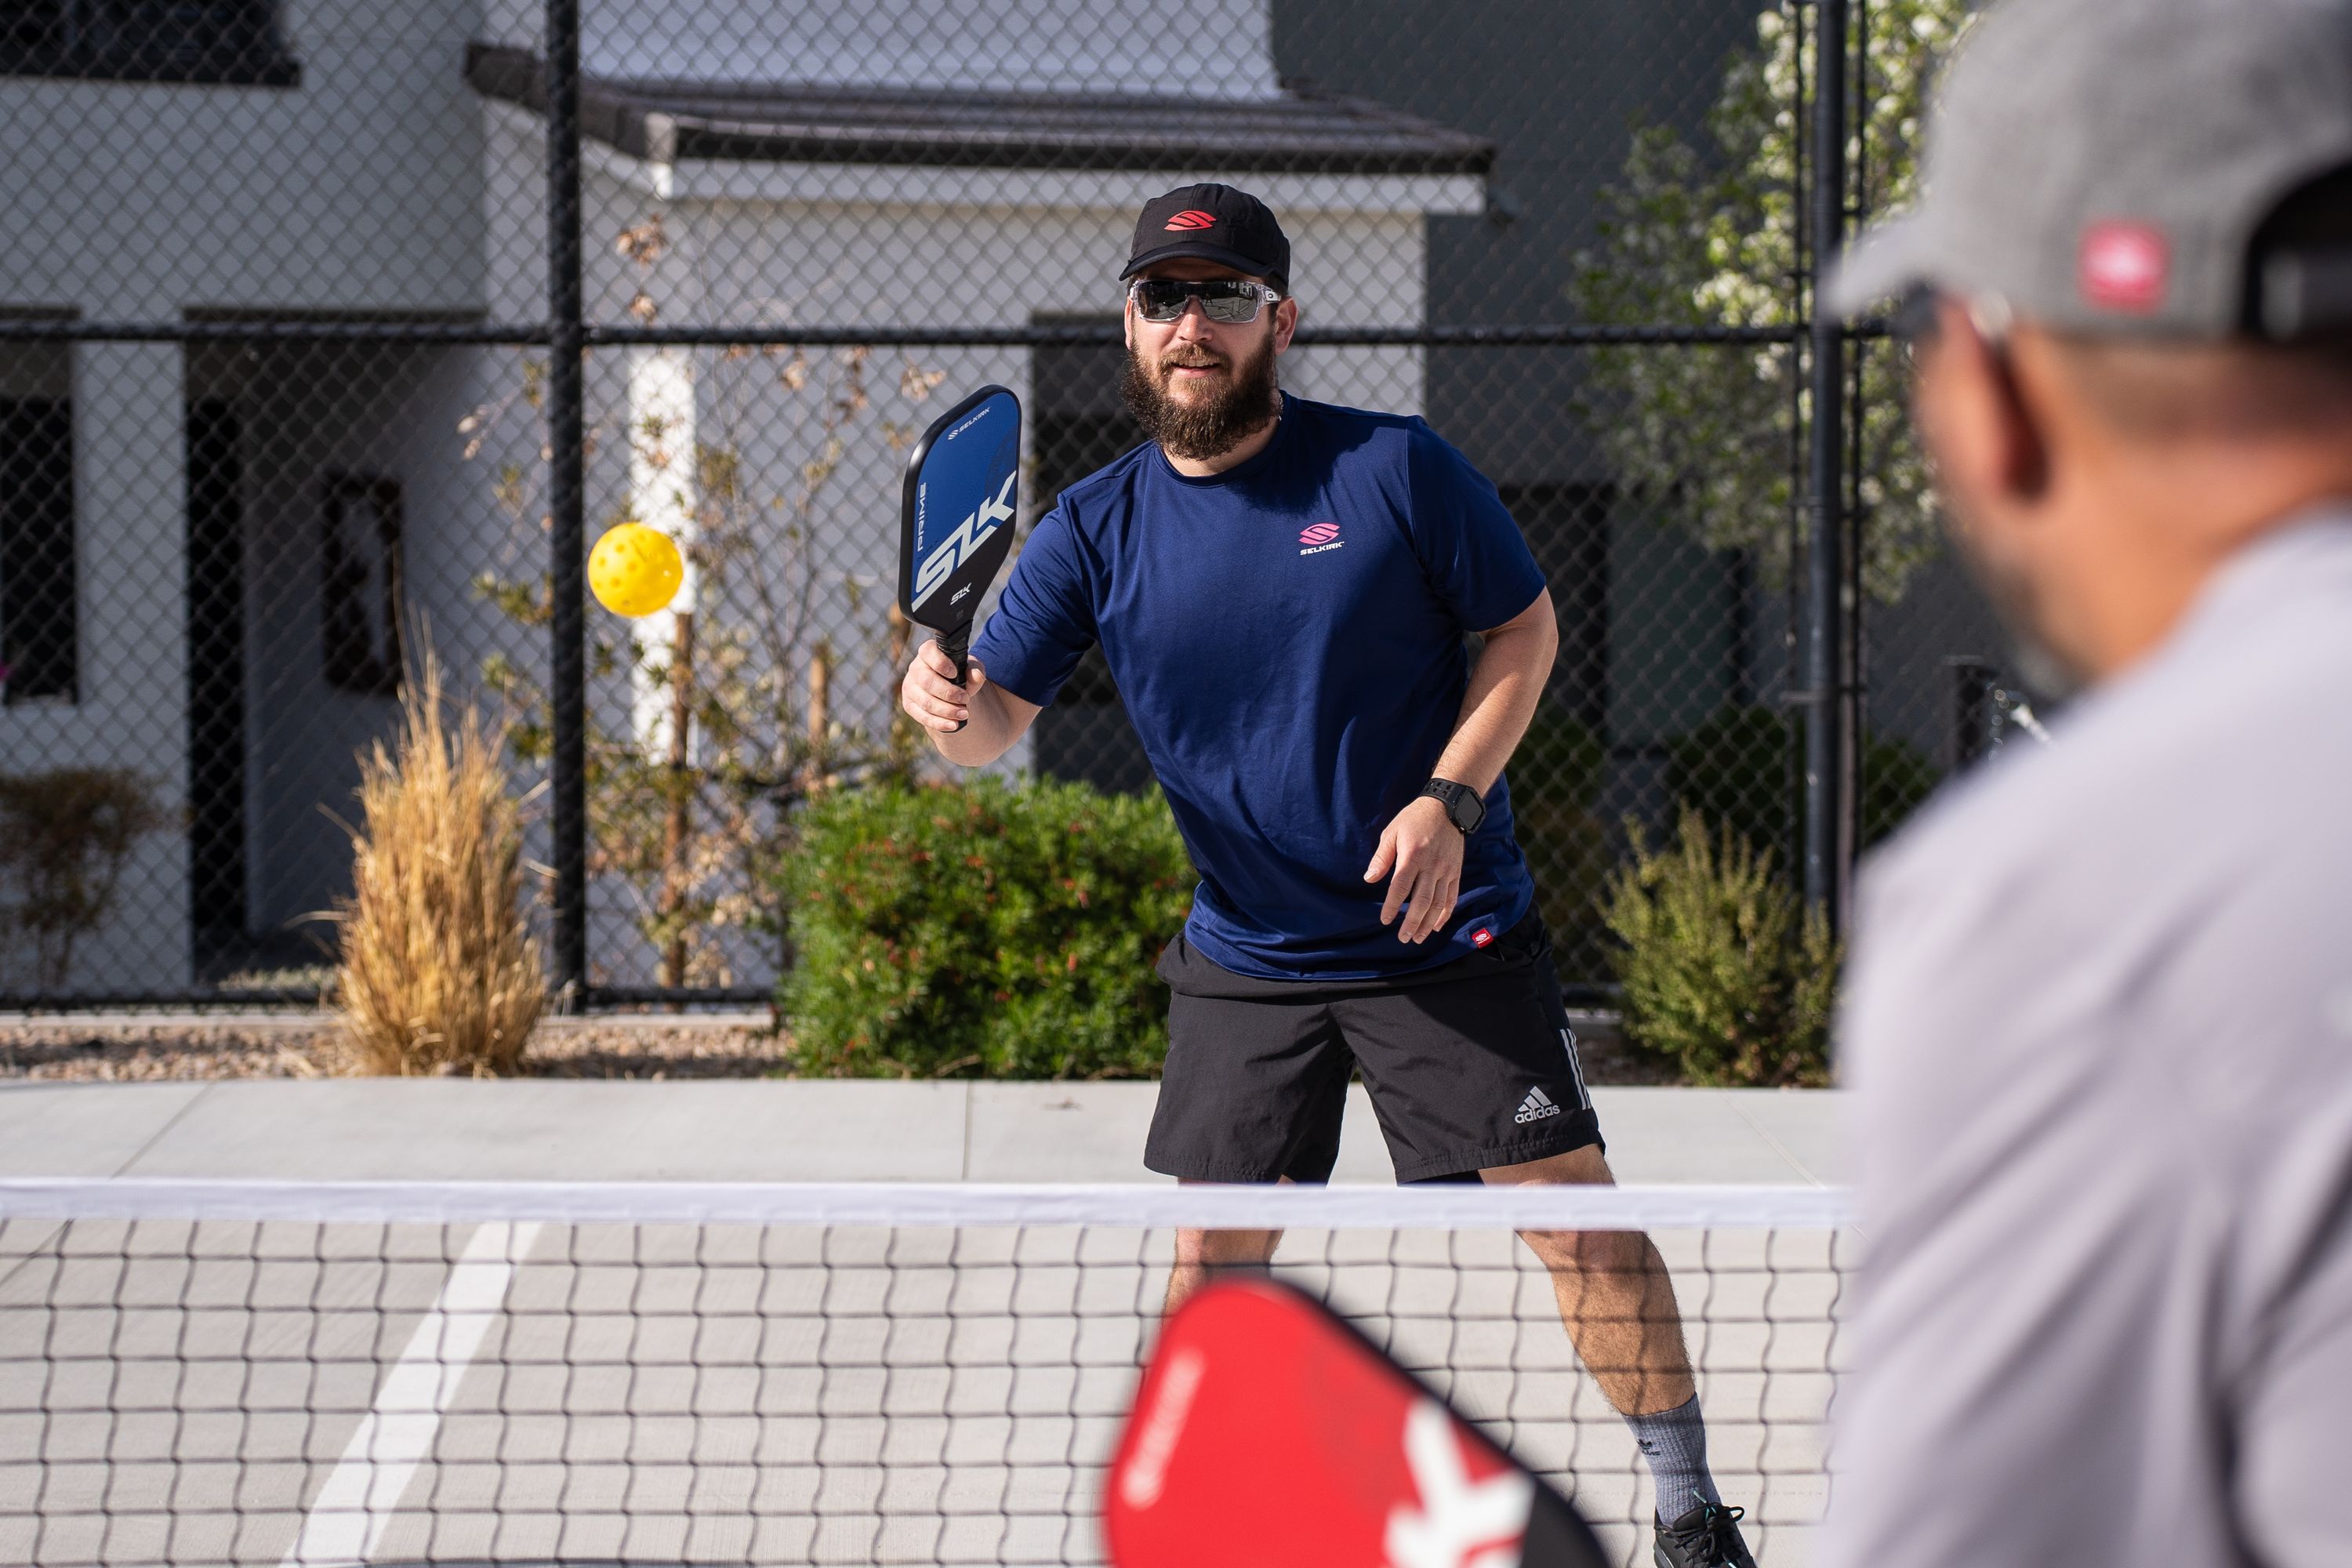 Pickleball ratings rules will help you determine your current level of play, and also tell you if you are ready for specific tournaments or leagues.